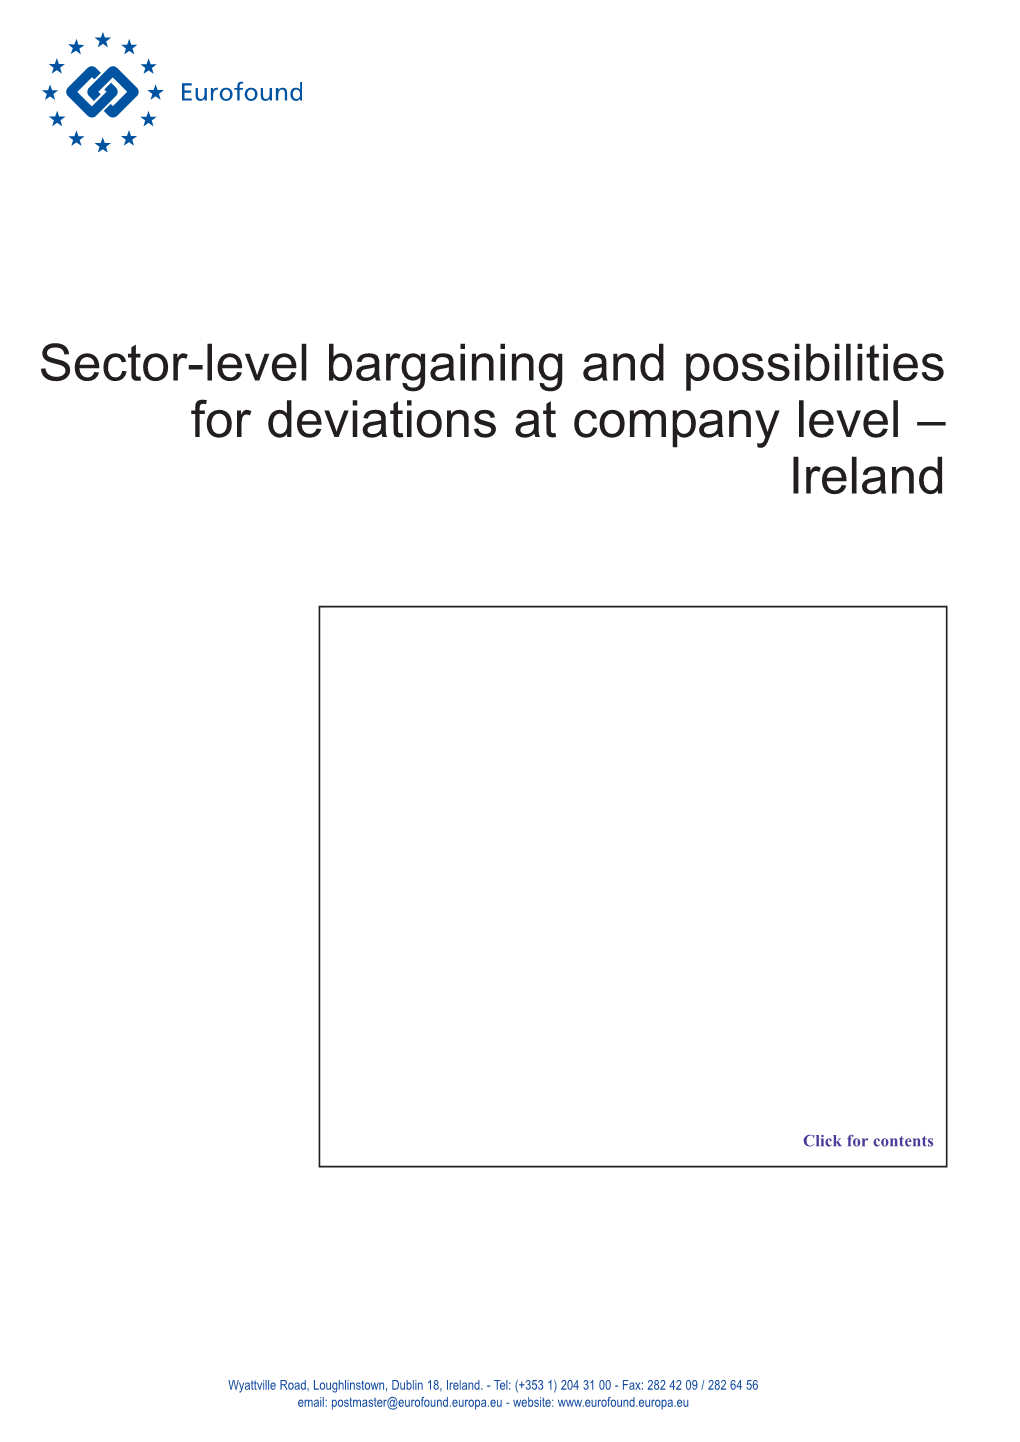 Sector-Level Bargaining and Possibilities for Deviations at Company Level – Ireland